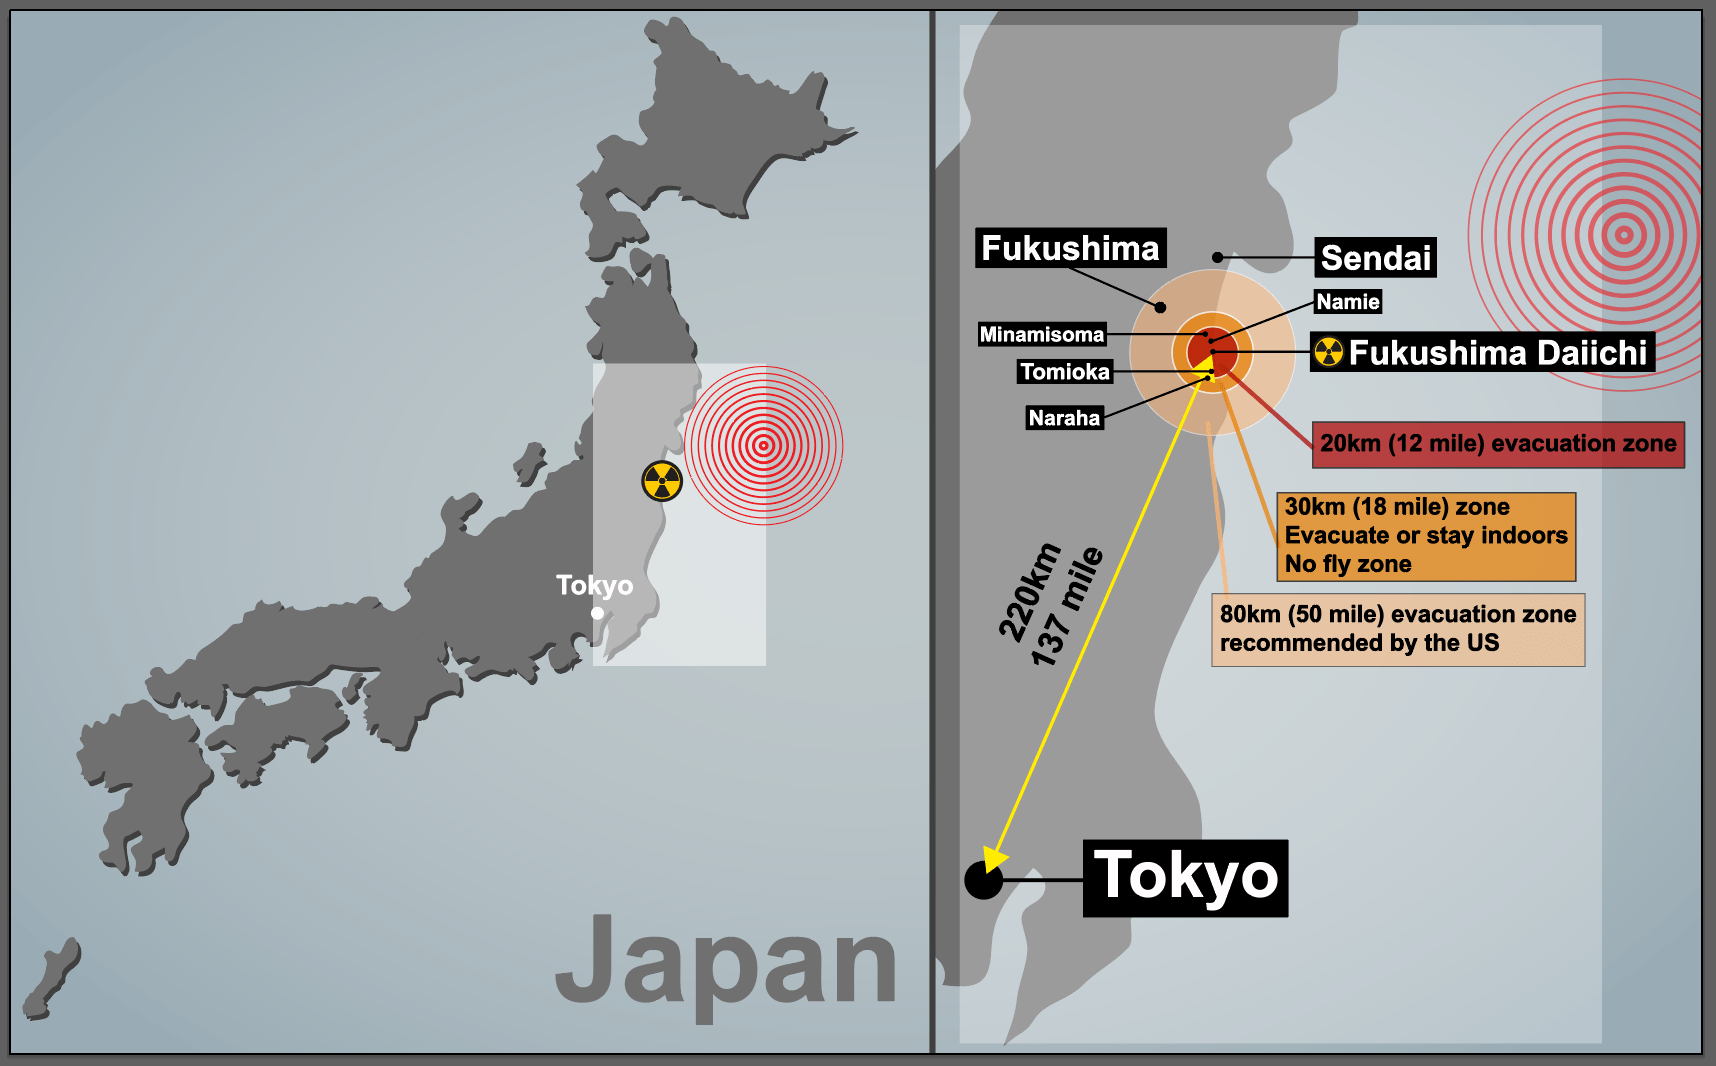 Japan 2011 Earthquake Case Study | A Level Geography